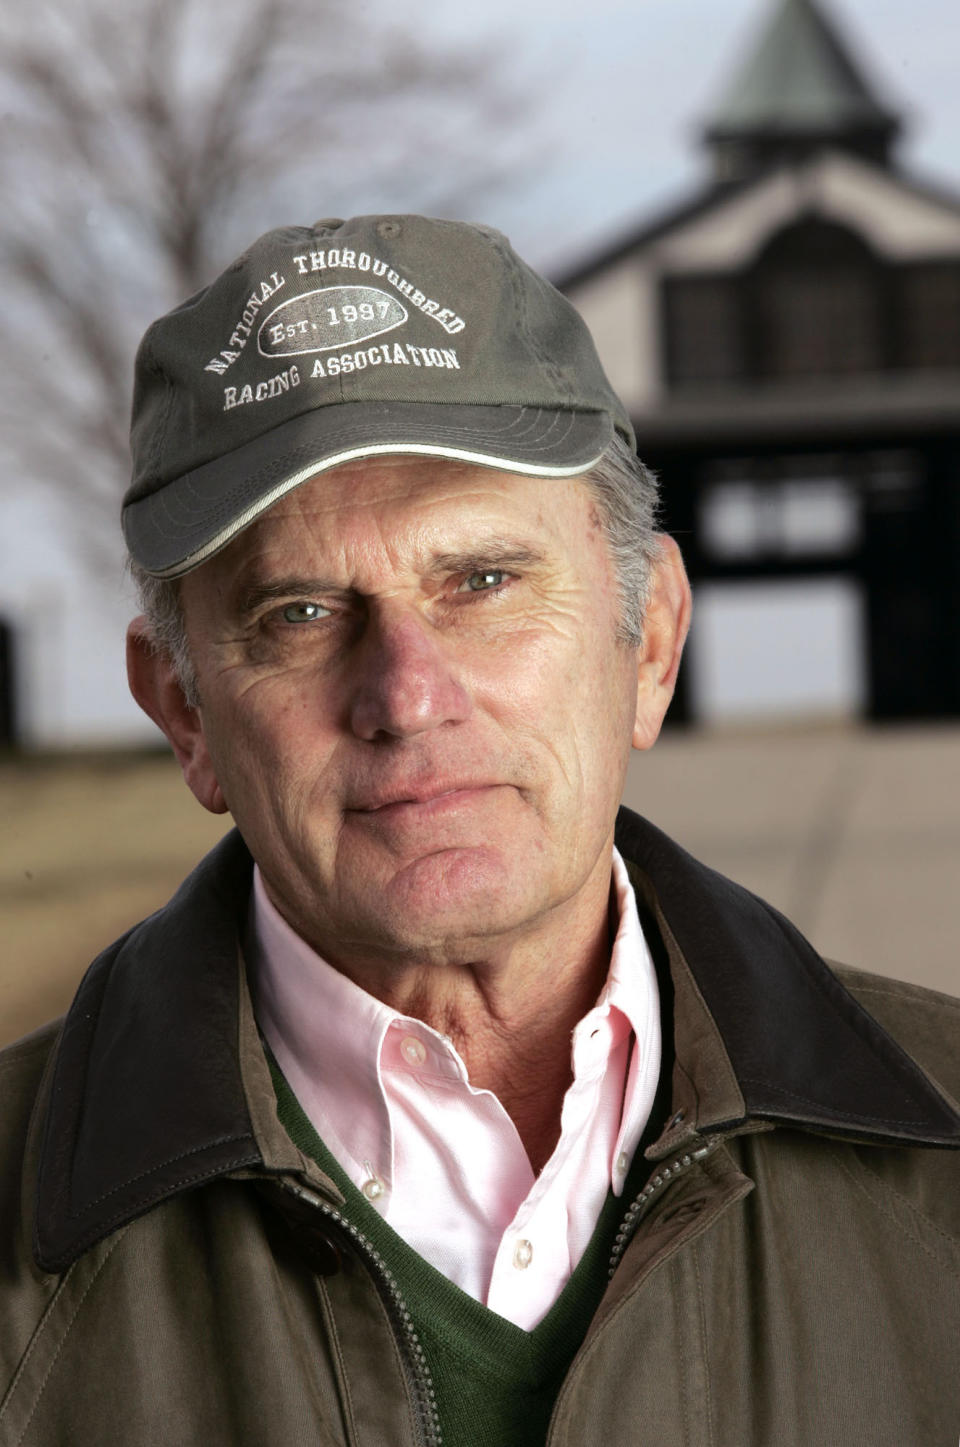 FILE - Brereton Jones, former Kentucky governor, is photographed at his horse farm, Feb. 1, 2006, in Lexington, Ky. The former Kentucky governor, a Republican turned Democrat who became a prominent horse breeder and then plunged into Kentucky politics, presiding over efforts to improve health care and strengthen ethics laws during his term as governor, has died, Gov. Andy Beshear said Monday, Sept. 18, 2023. (AP Photo/Brian Tietz, File)